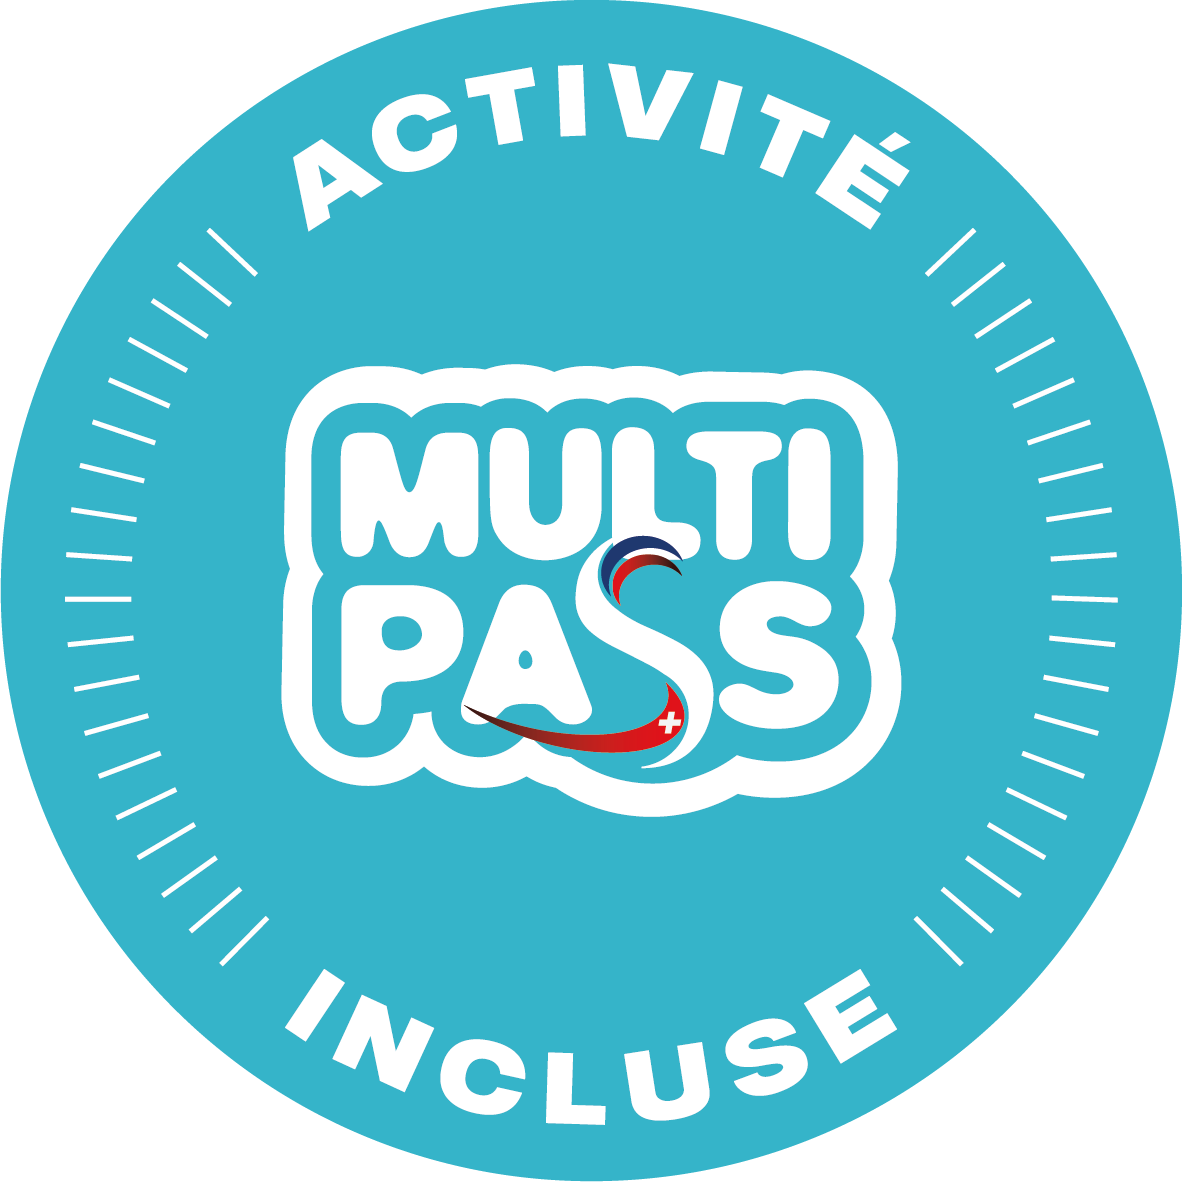 Activities included in the Multi Pass